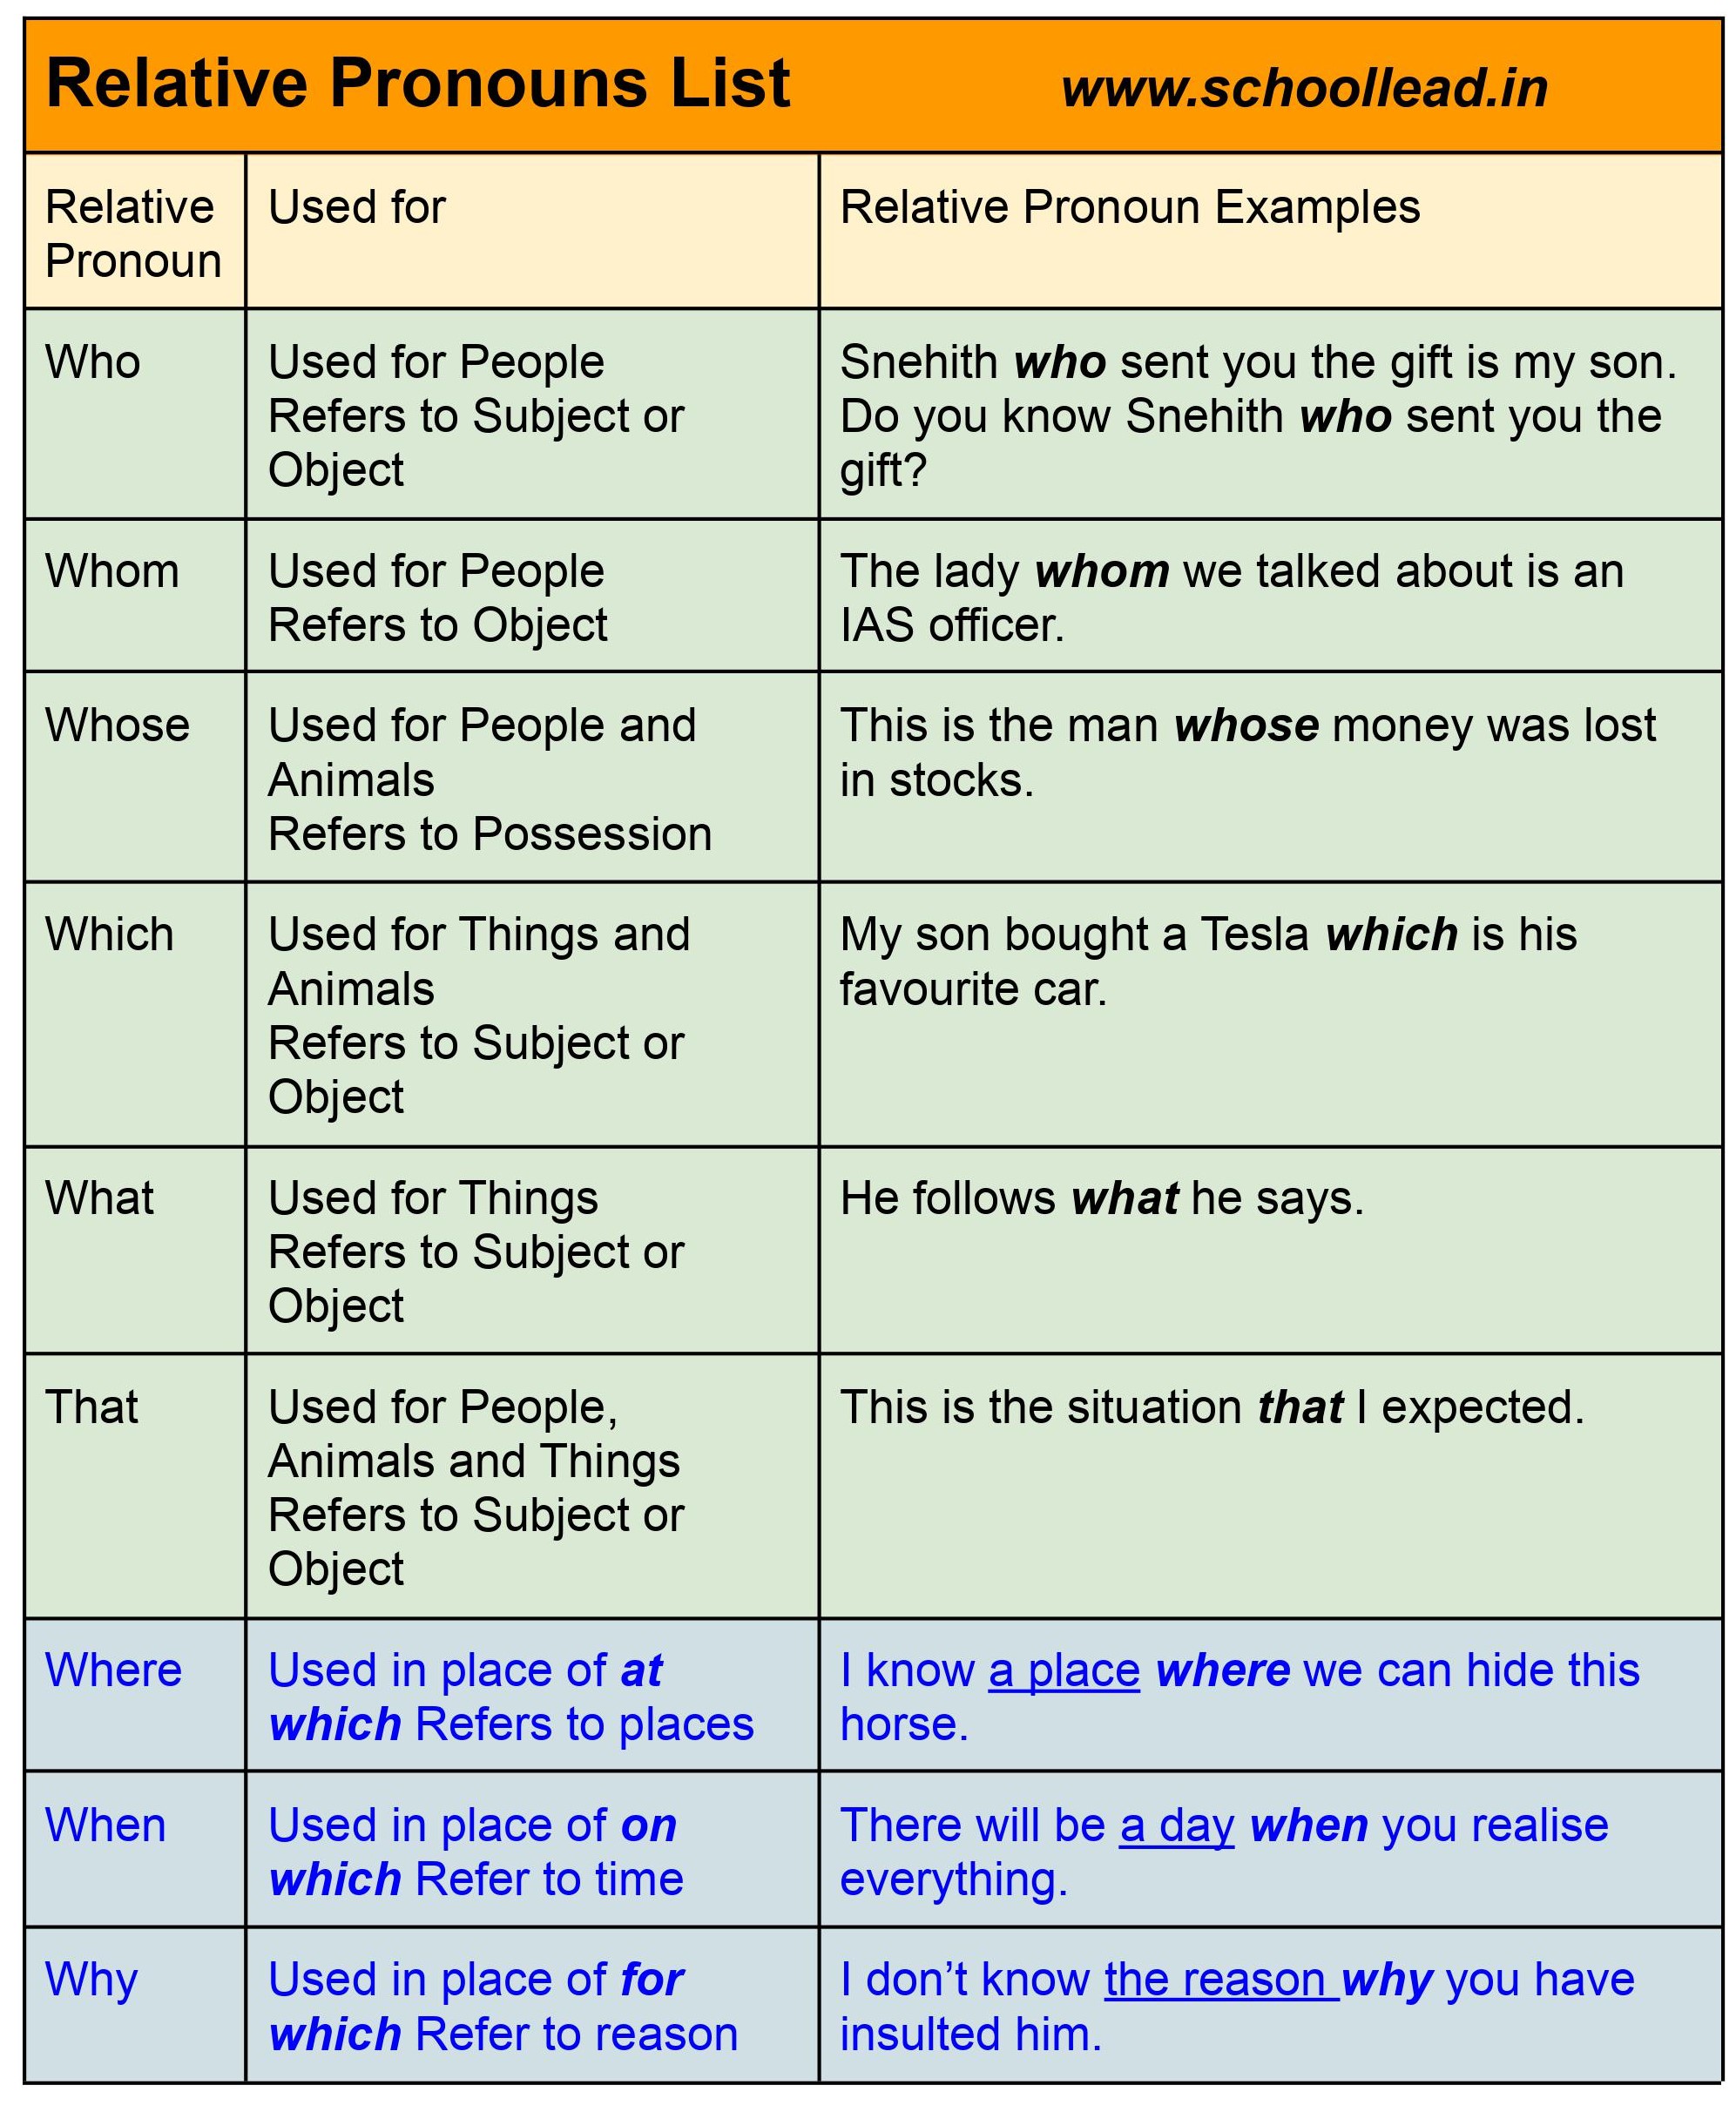 List Of All Relative Pronouns In English